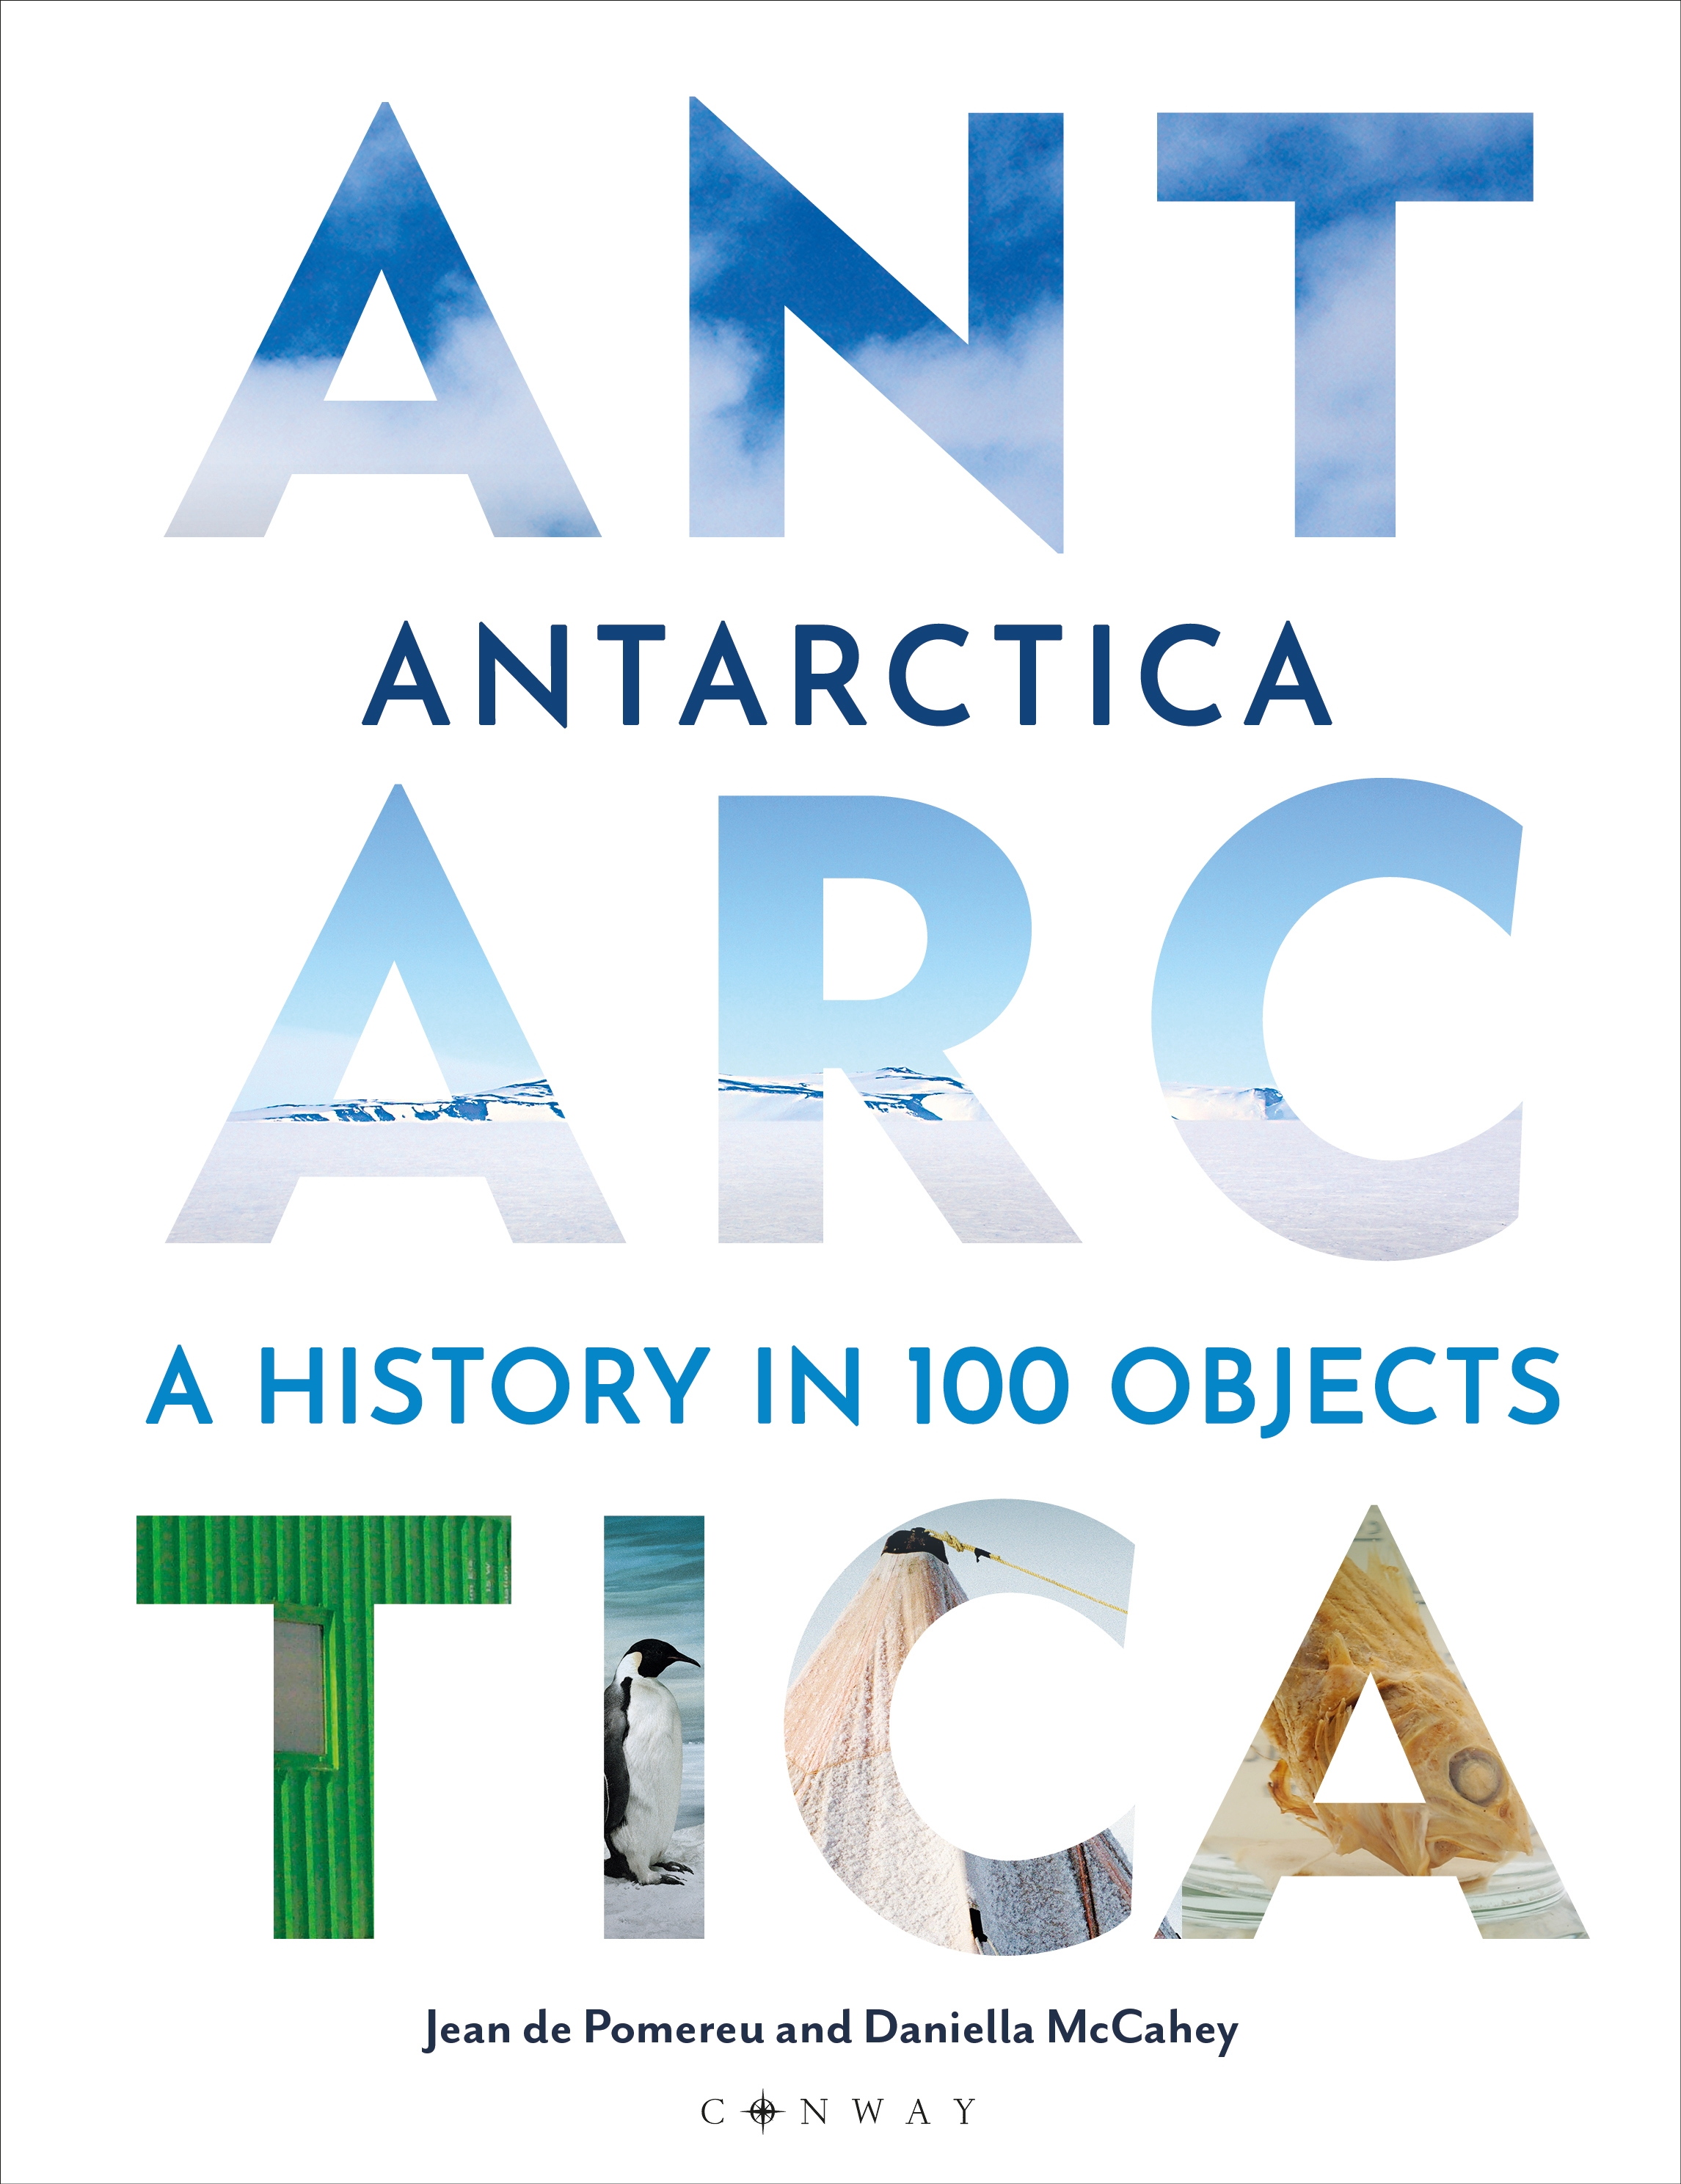 Antarctica A History in 100 Objects By Jean de Pomereu and Daniella McCahey